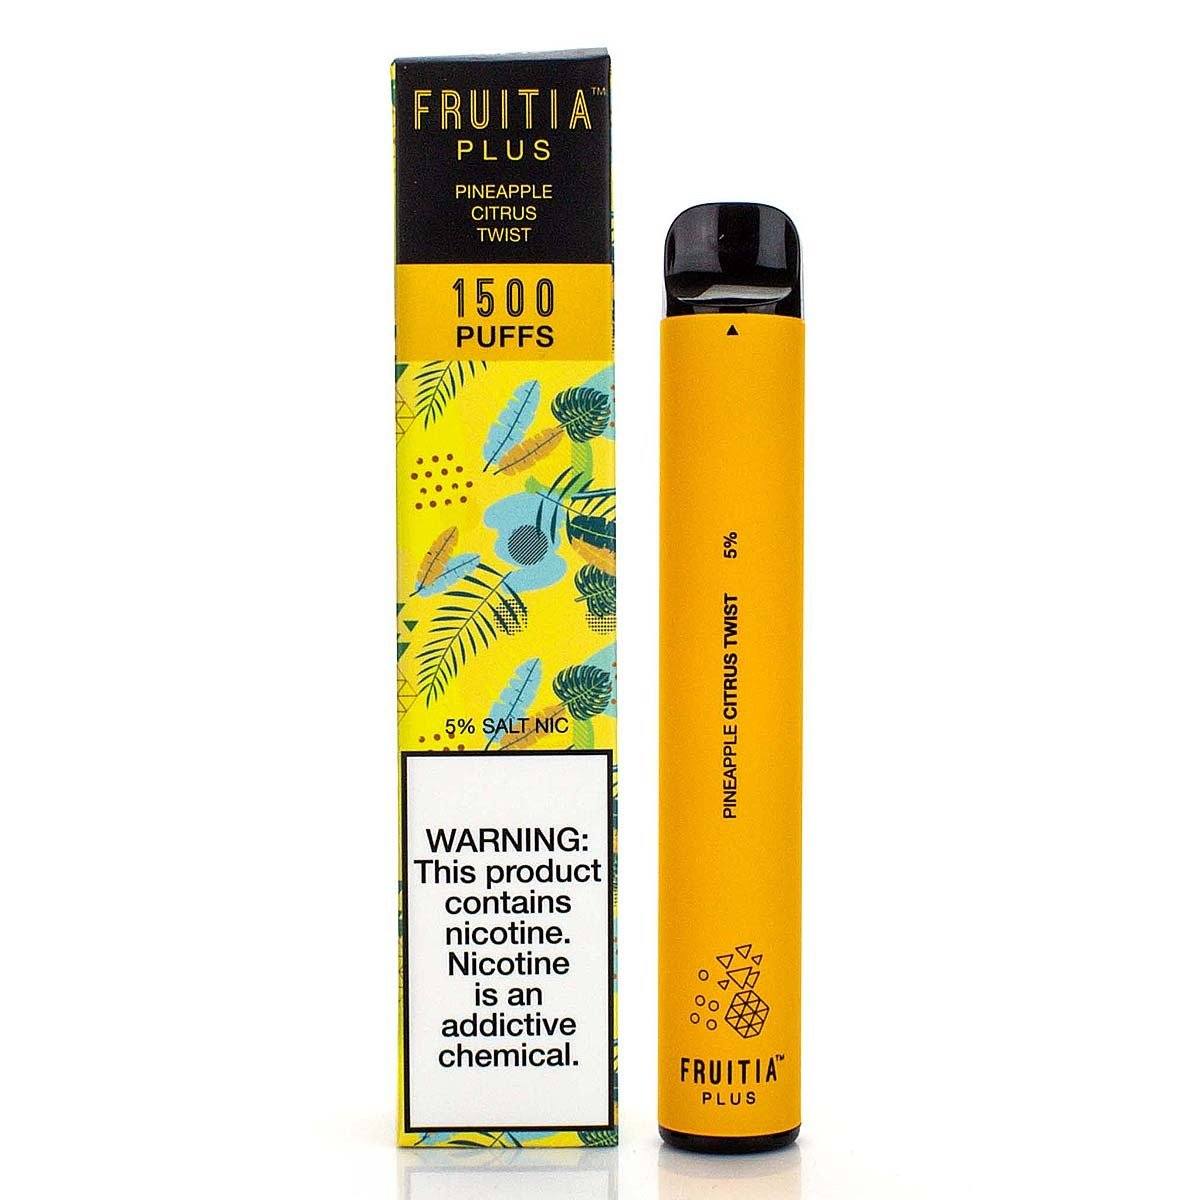 Fruitia Plus Disposable Device | 1500 Puffs Pineapple Citrus Twist with Packaging